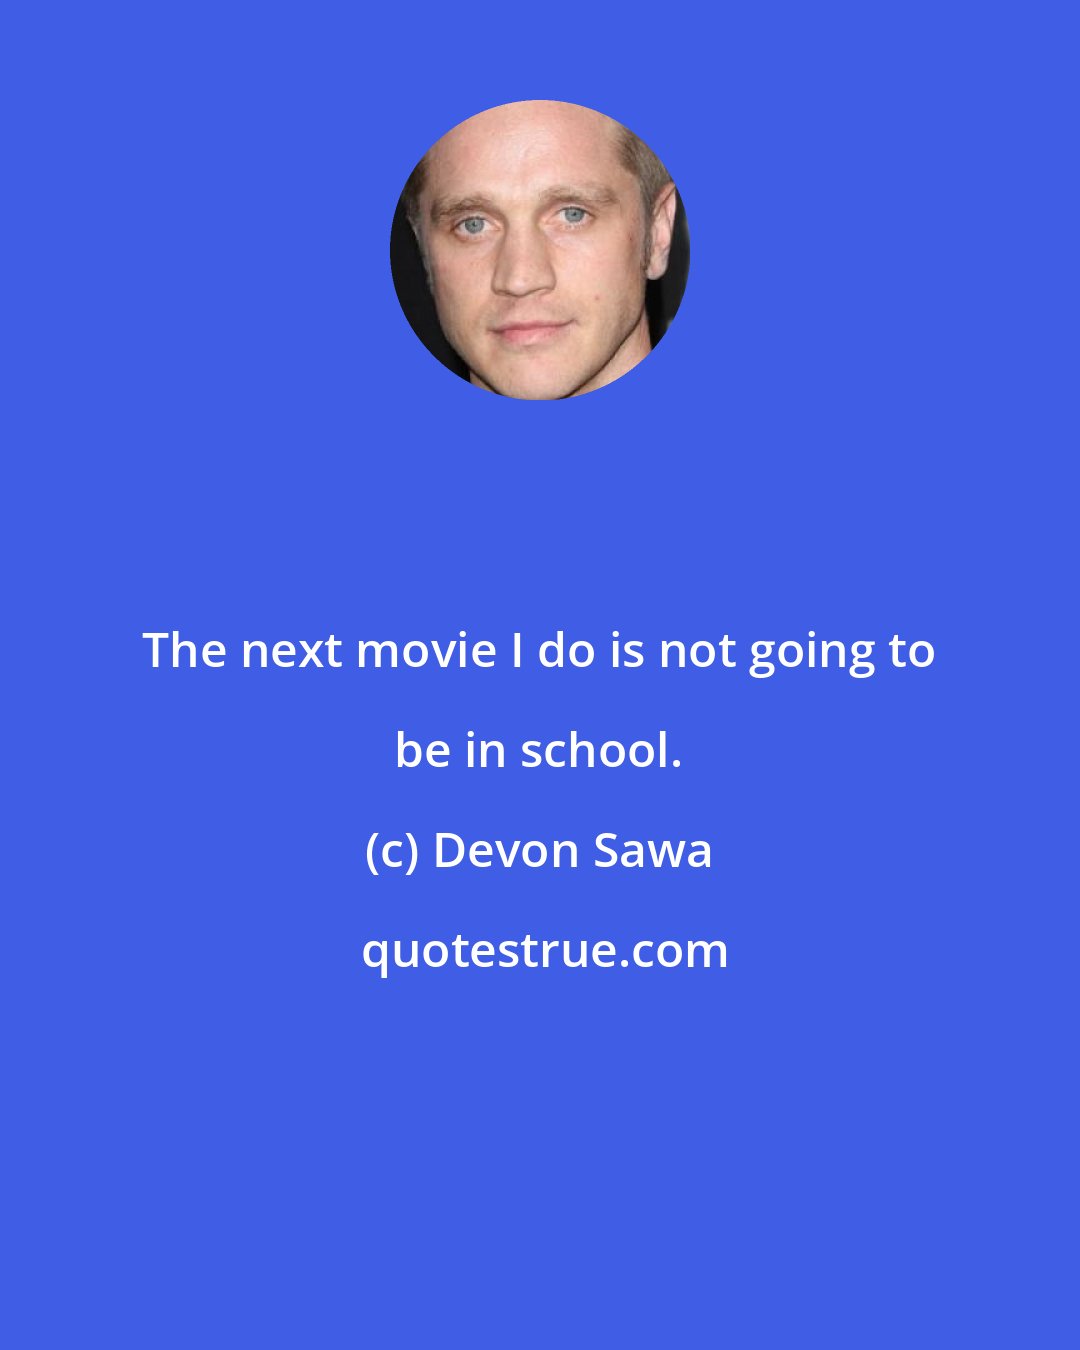 Devon Sawa: The next movie I do is not going to be in school.